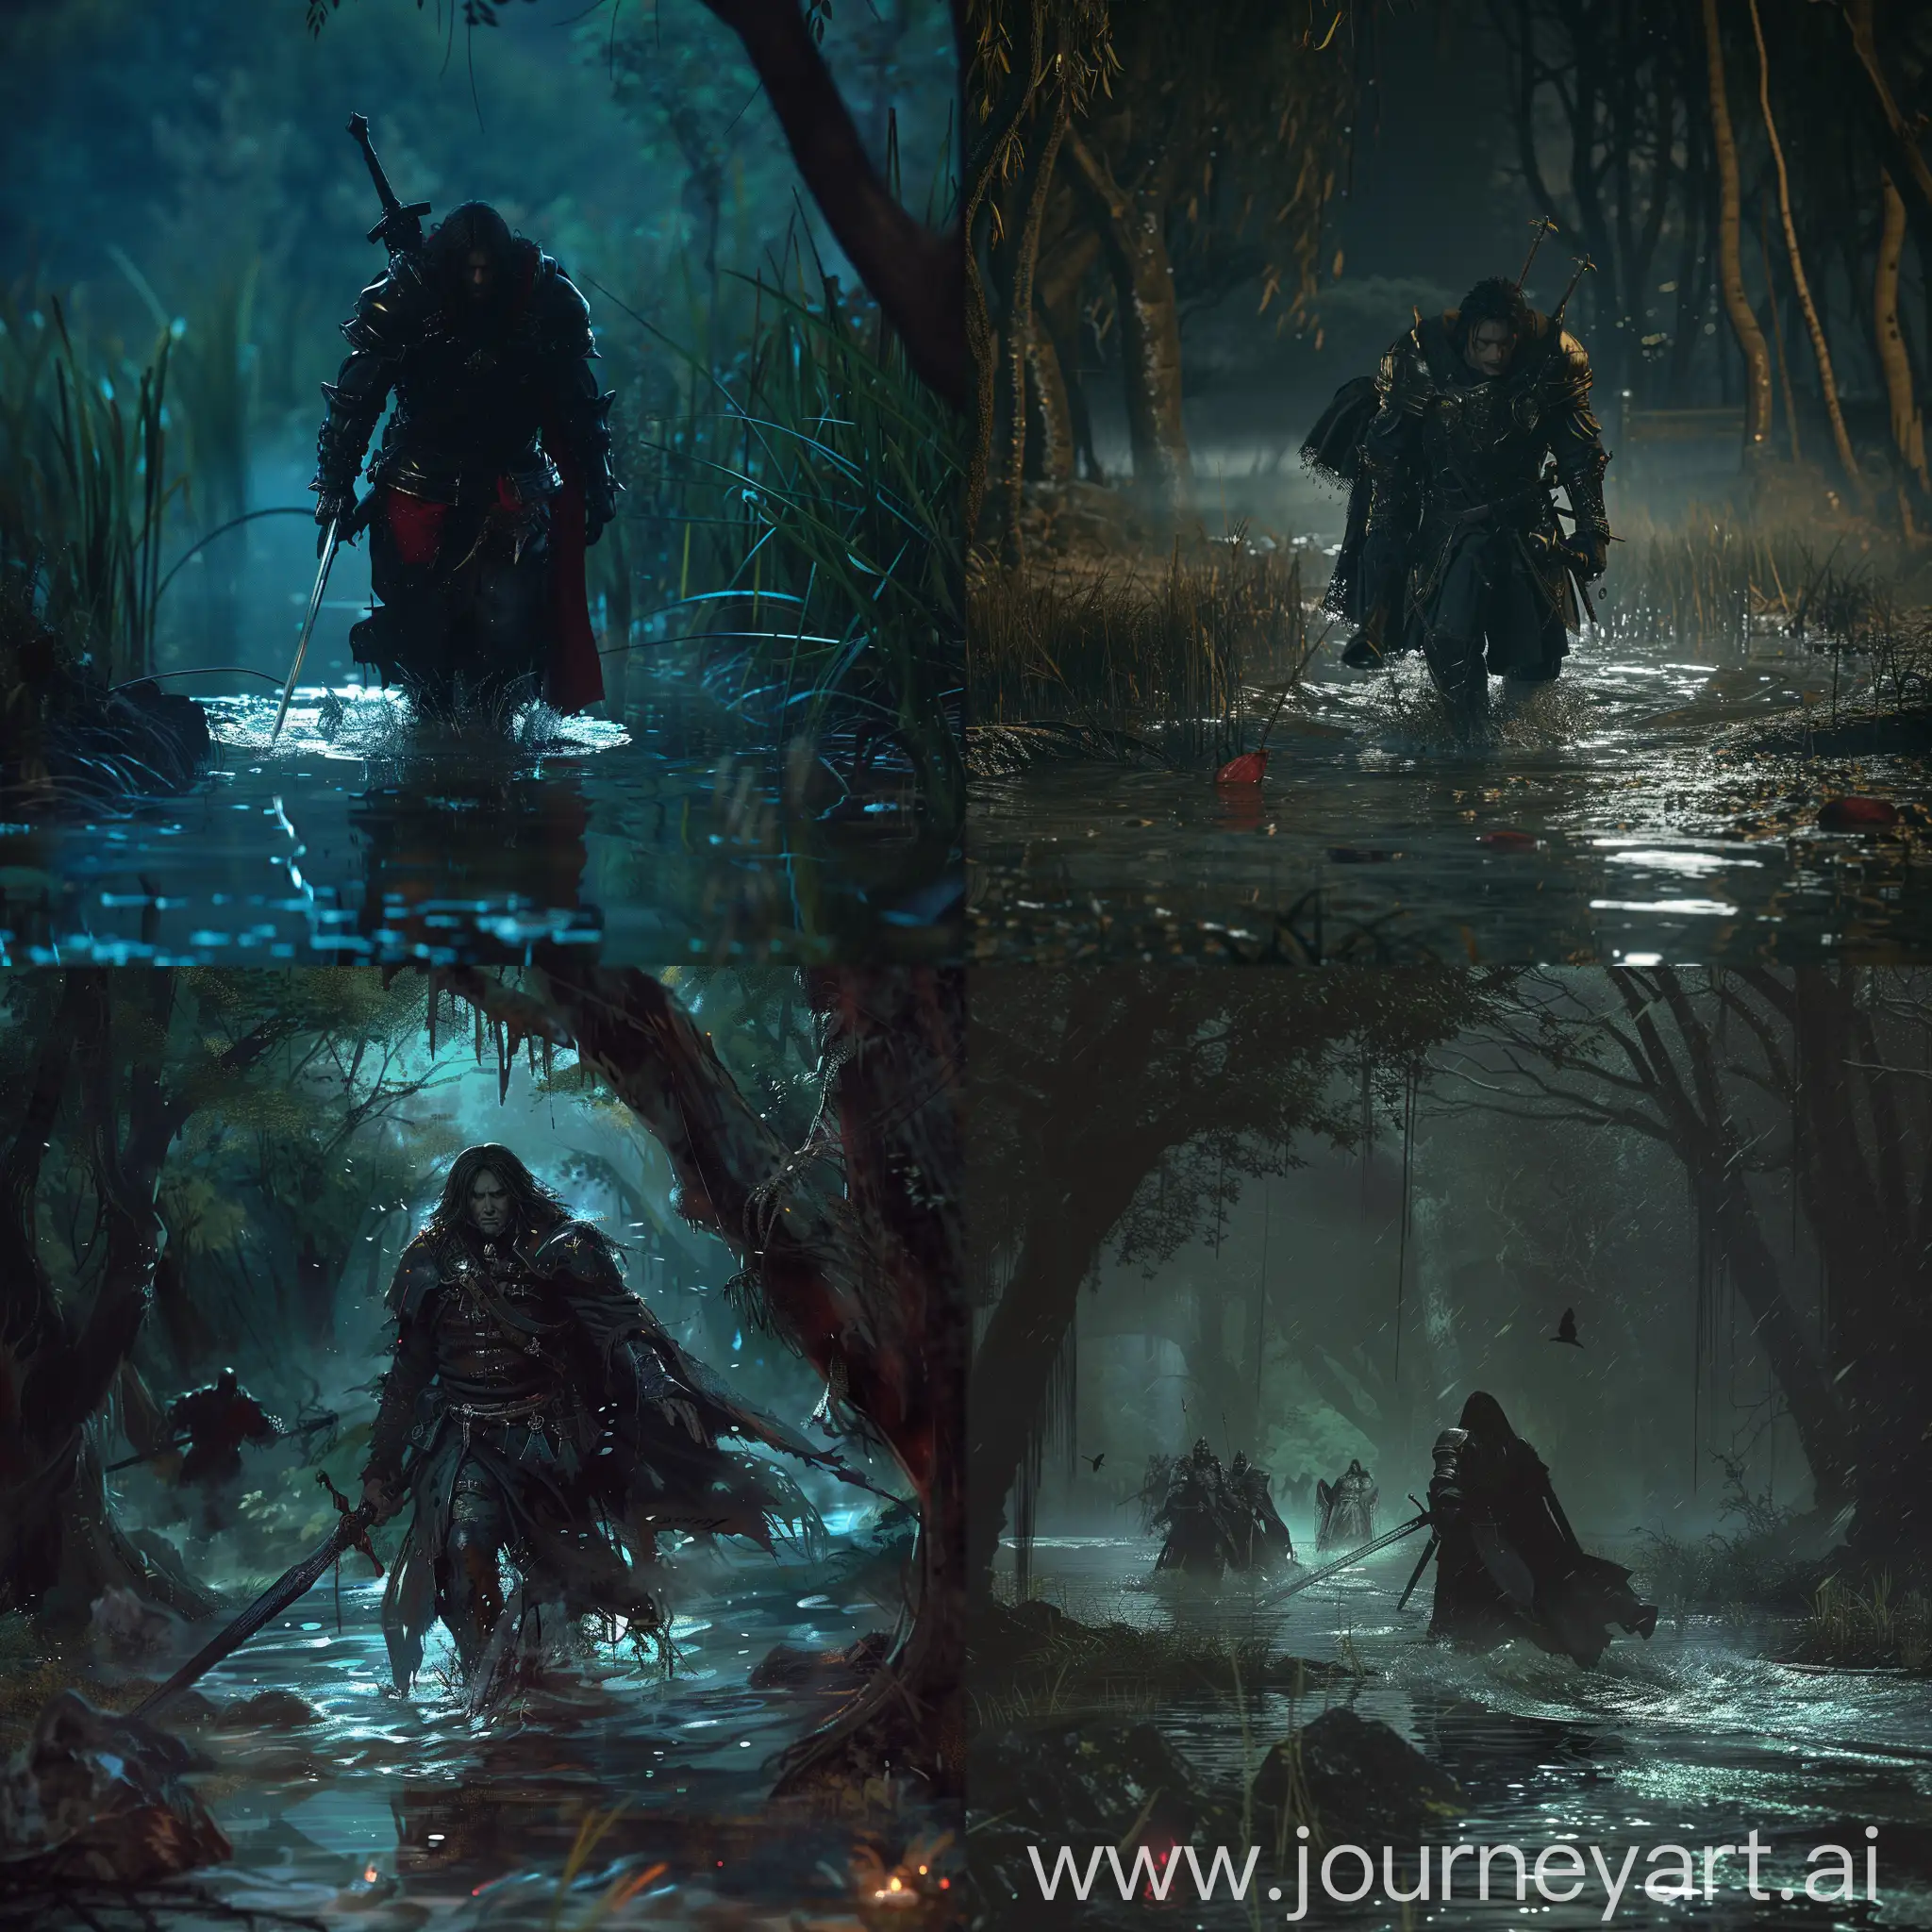 Sinister-Legion-Emerges-from-Watery-Swamp-in-Dim-Night-Light